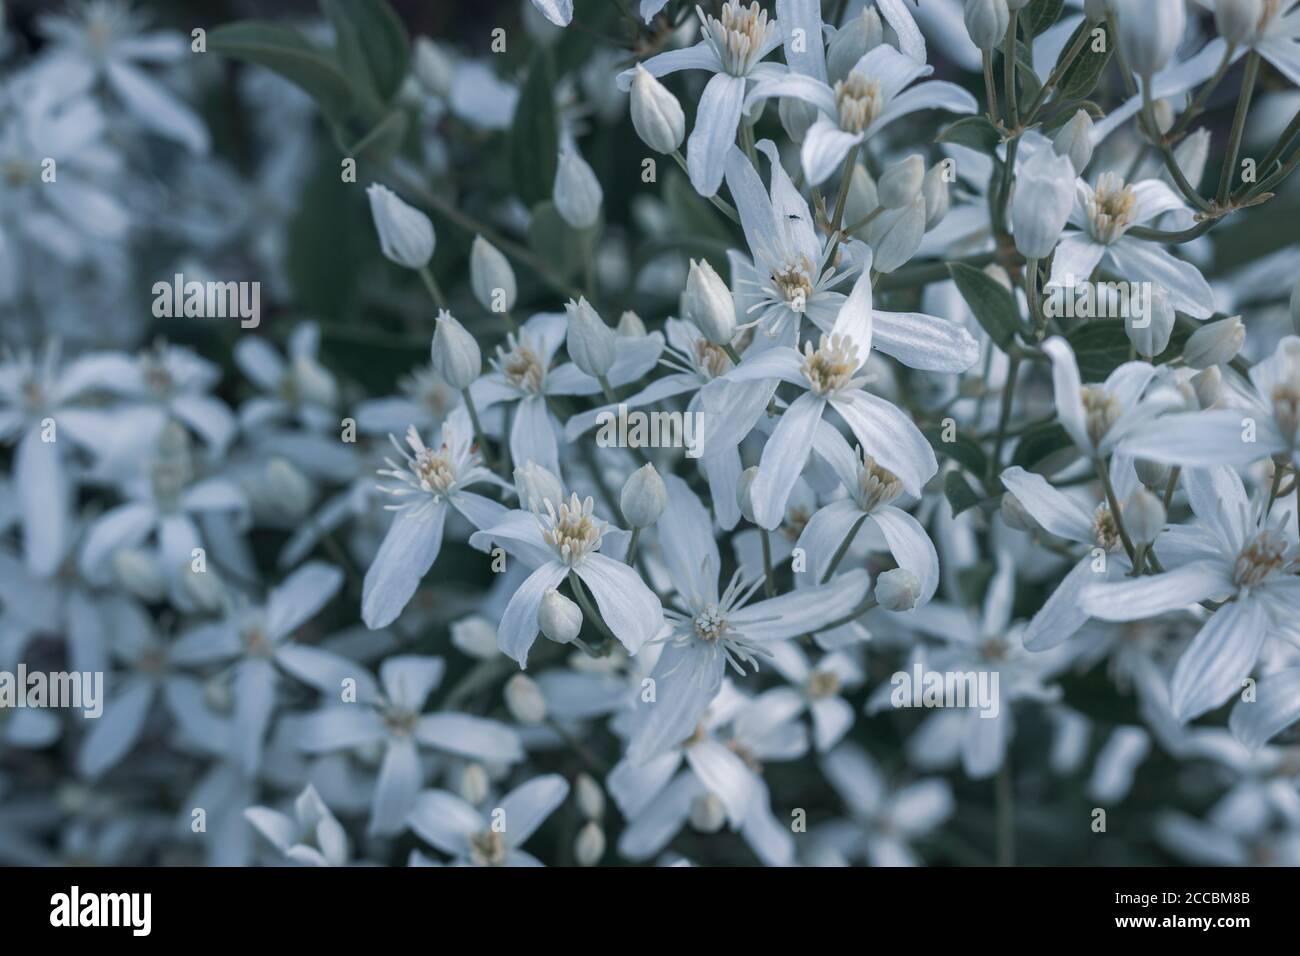 Small white fragrant flowers of Clematis recta or Clematis flammula or clematis Manchurian in summer garden closeup. Flowery natural background Stock Photo